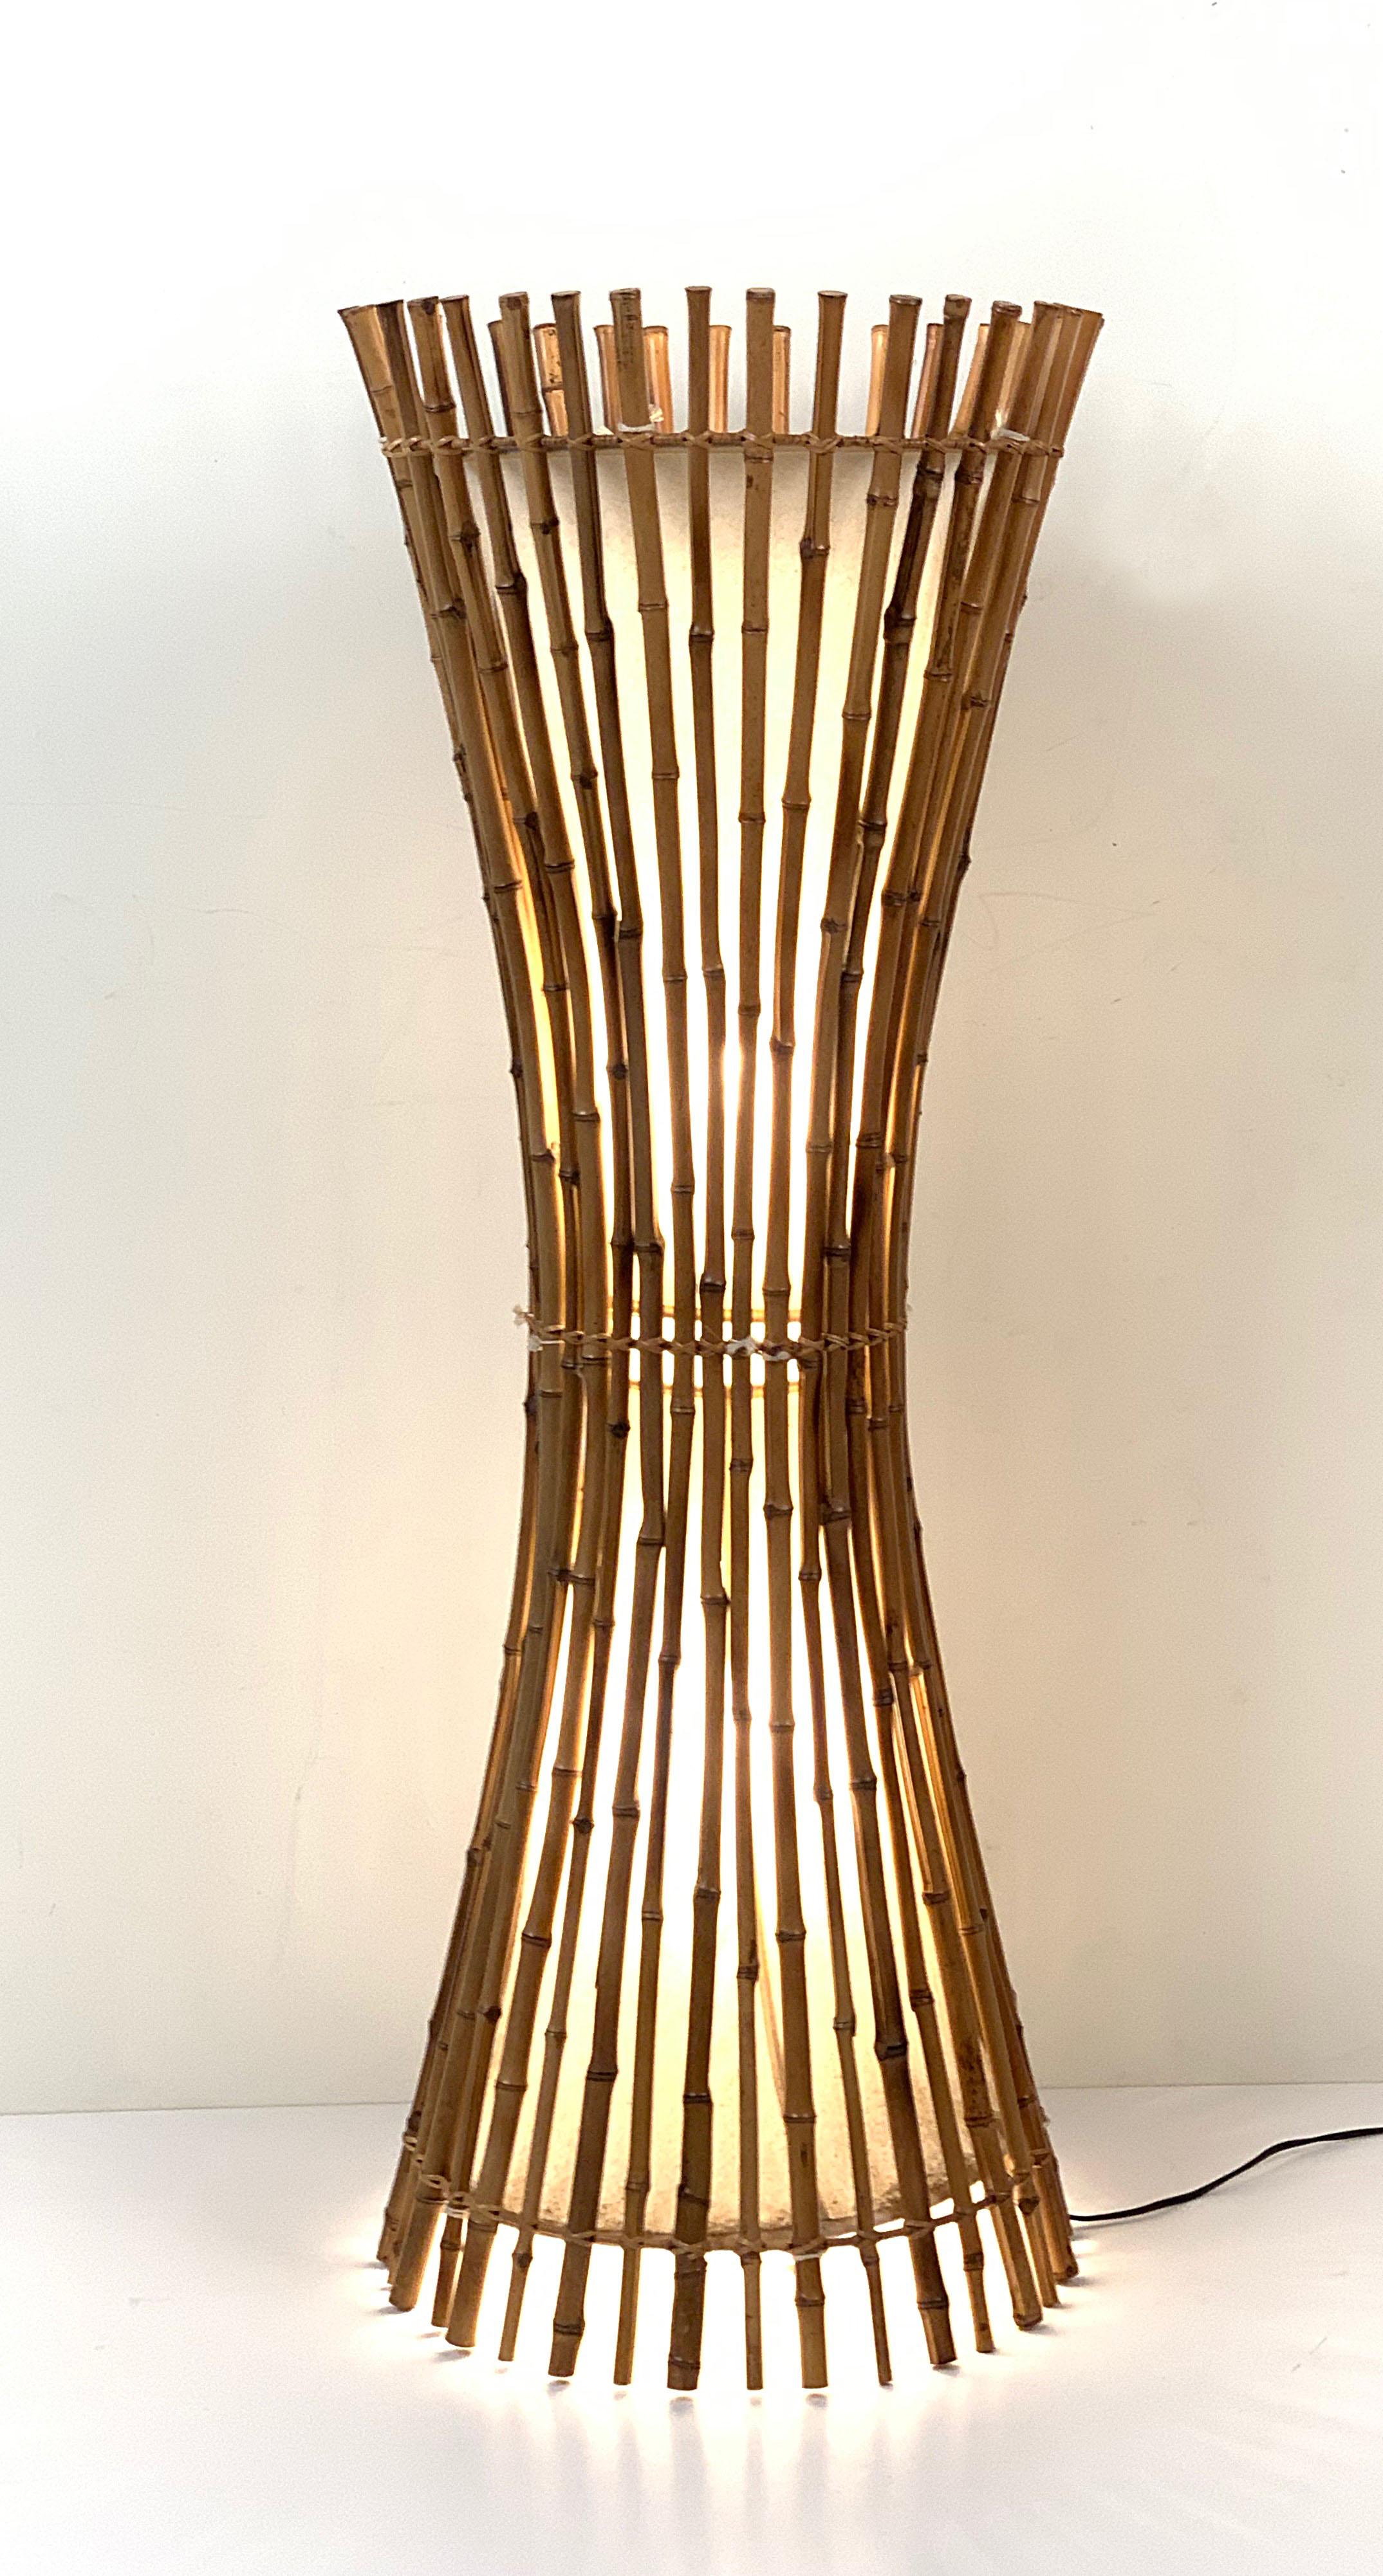 Midcentury Bamboo and Rattan Italian Floor Lamp after Franco Albini, 1960s For Sale 1